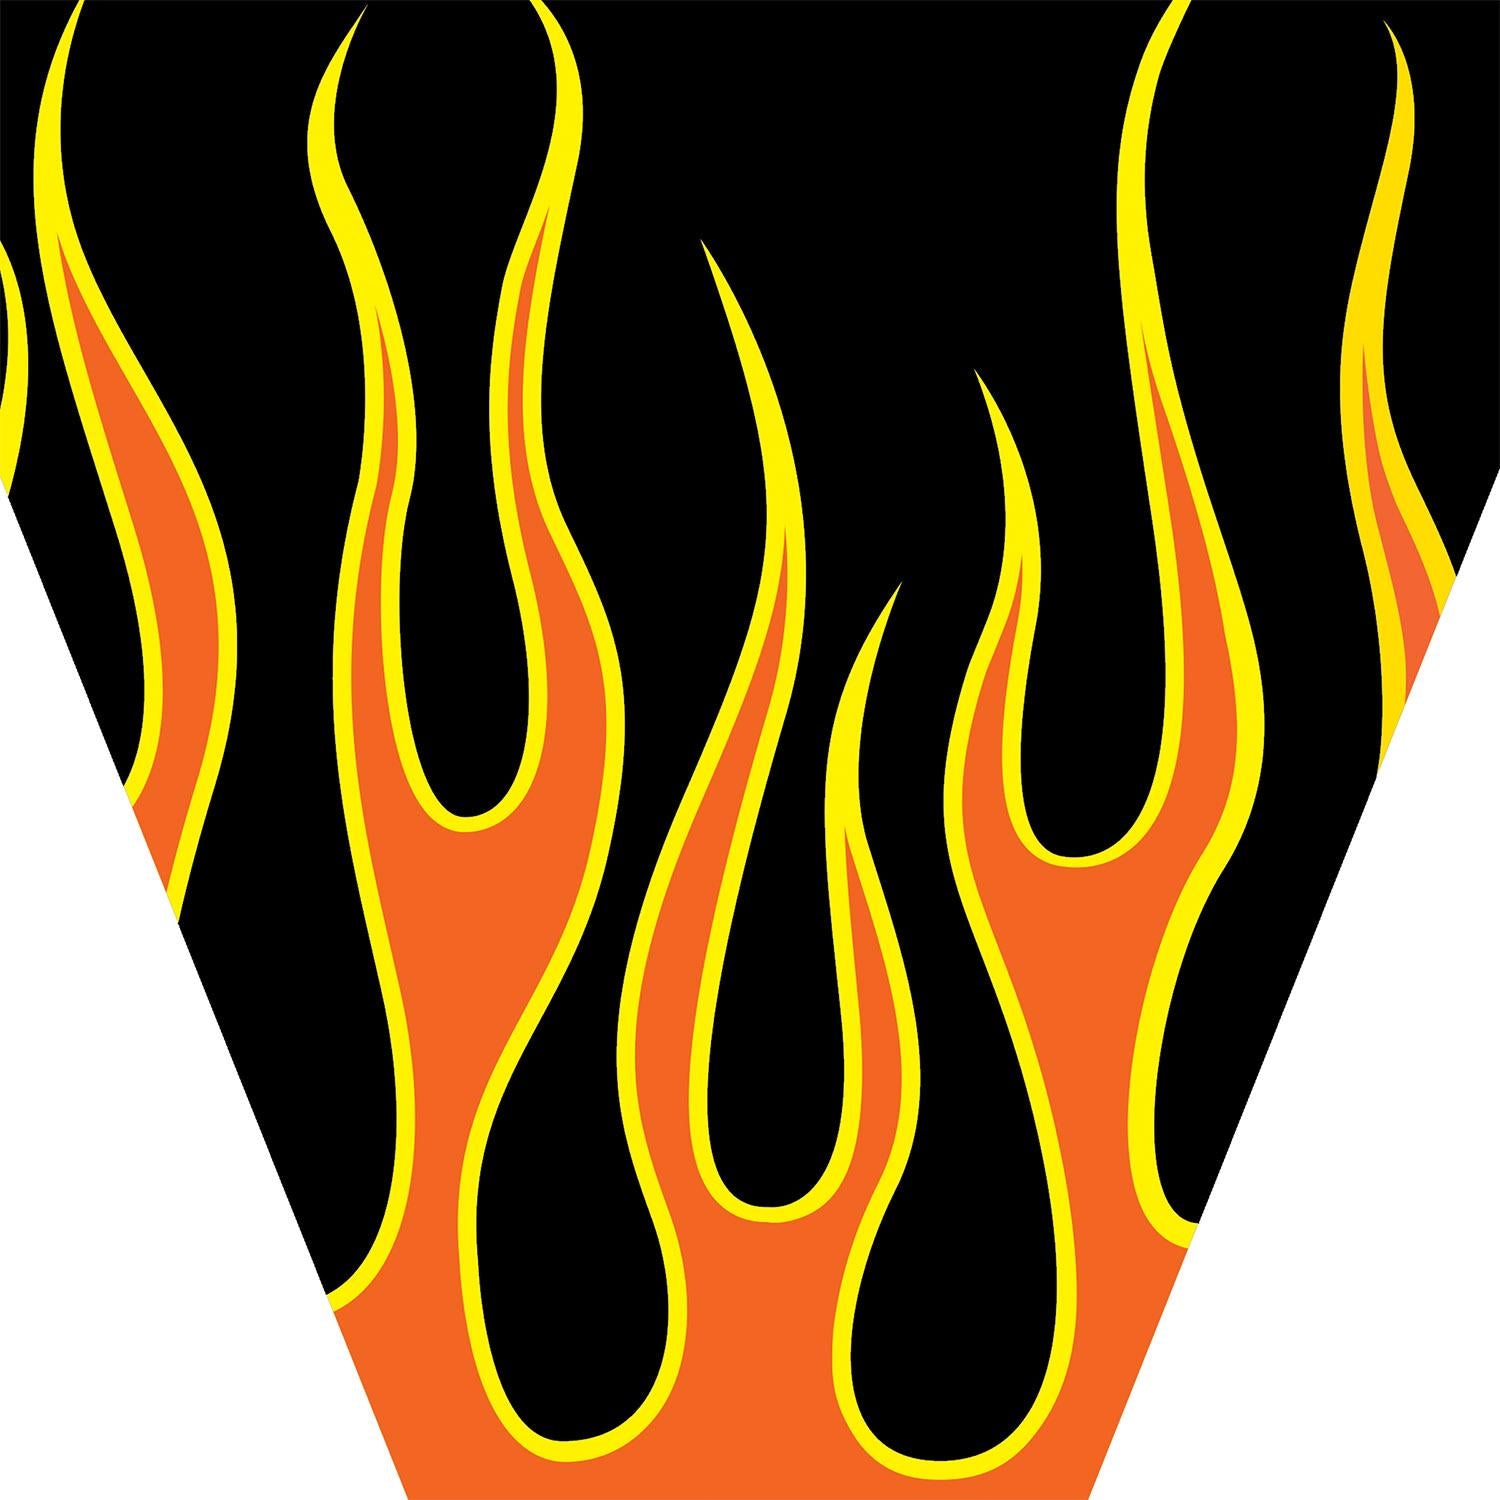 Beistle Flame Party Pennant Banner